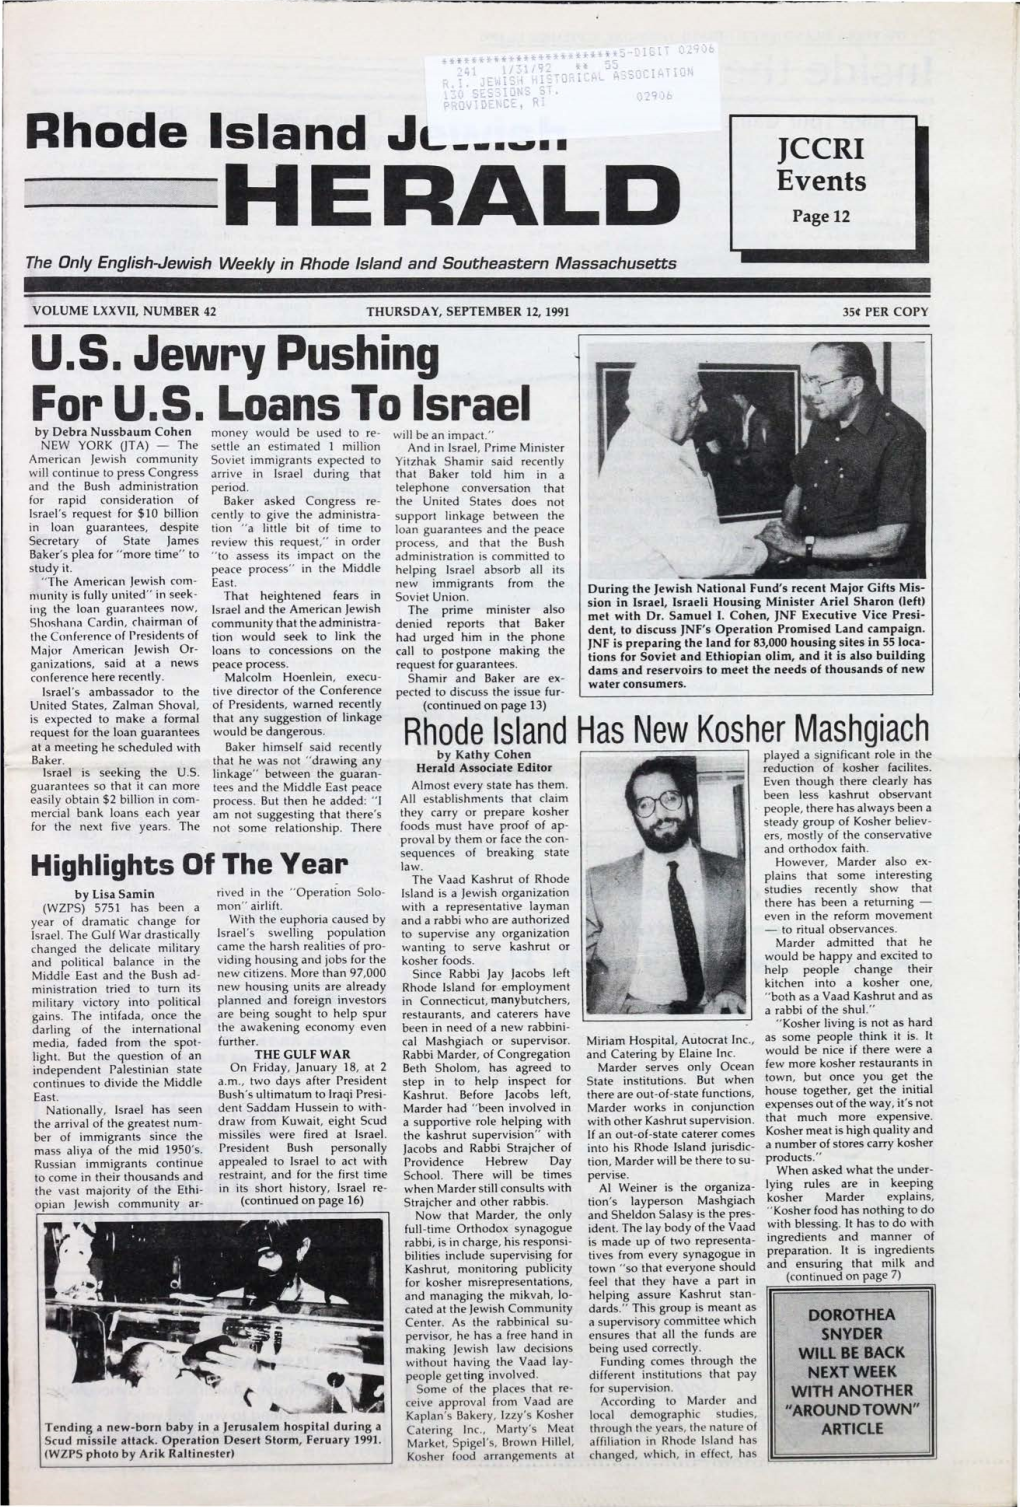 HERALD Page 12 the Only English-Jewish Weekly in Rhode Island and Southeastern Massachusetts